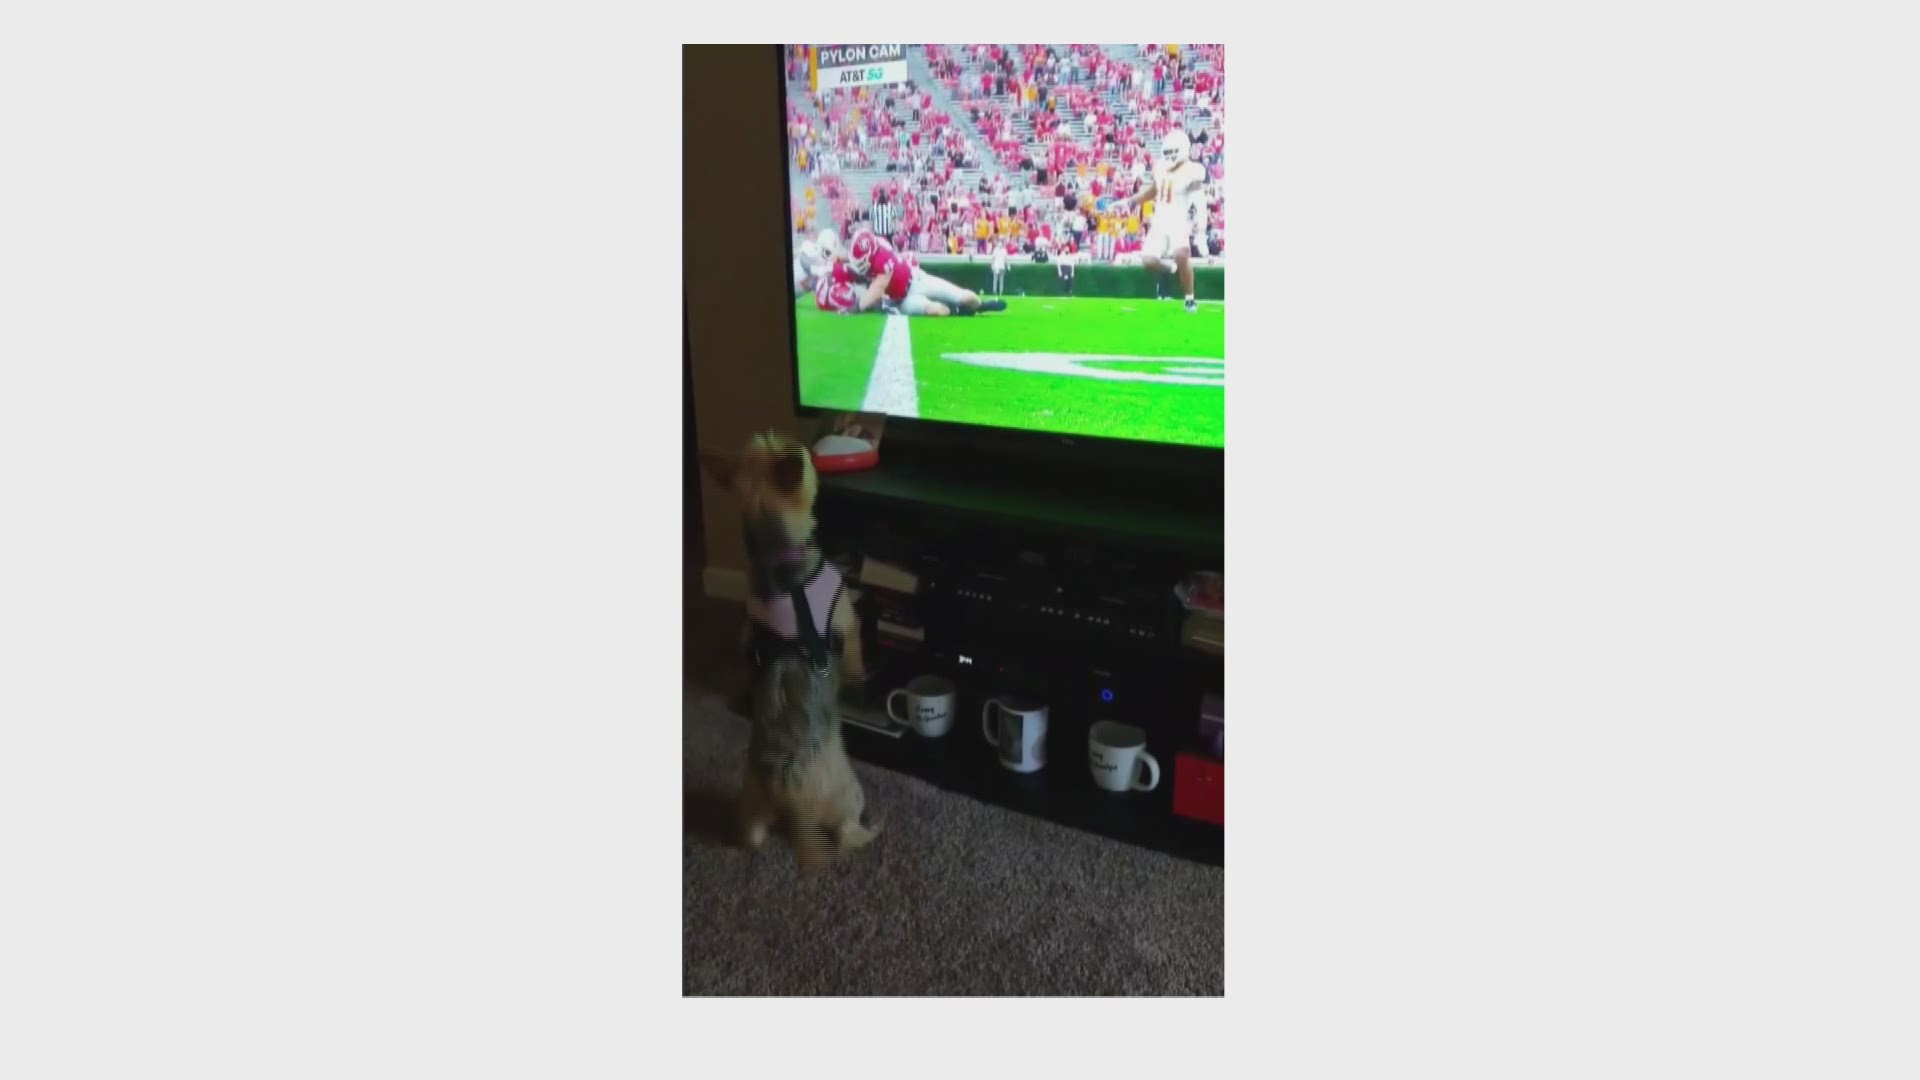 One dog cheered on the Vols during their game in Georgia on Saturday! Credit - Karen Miraglia